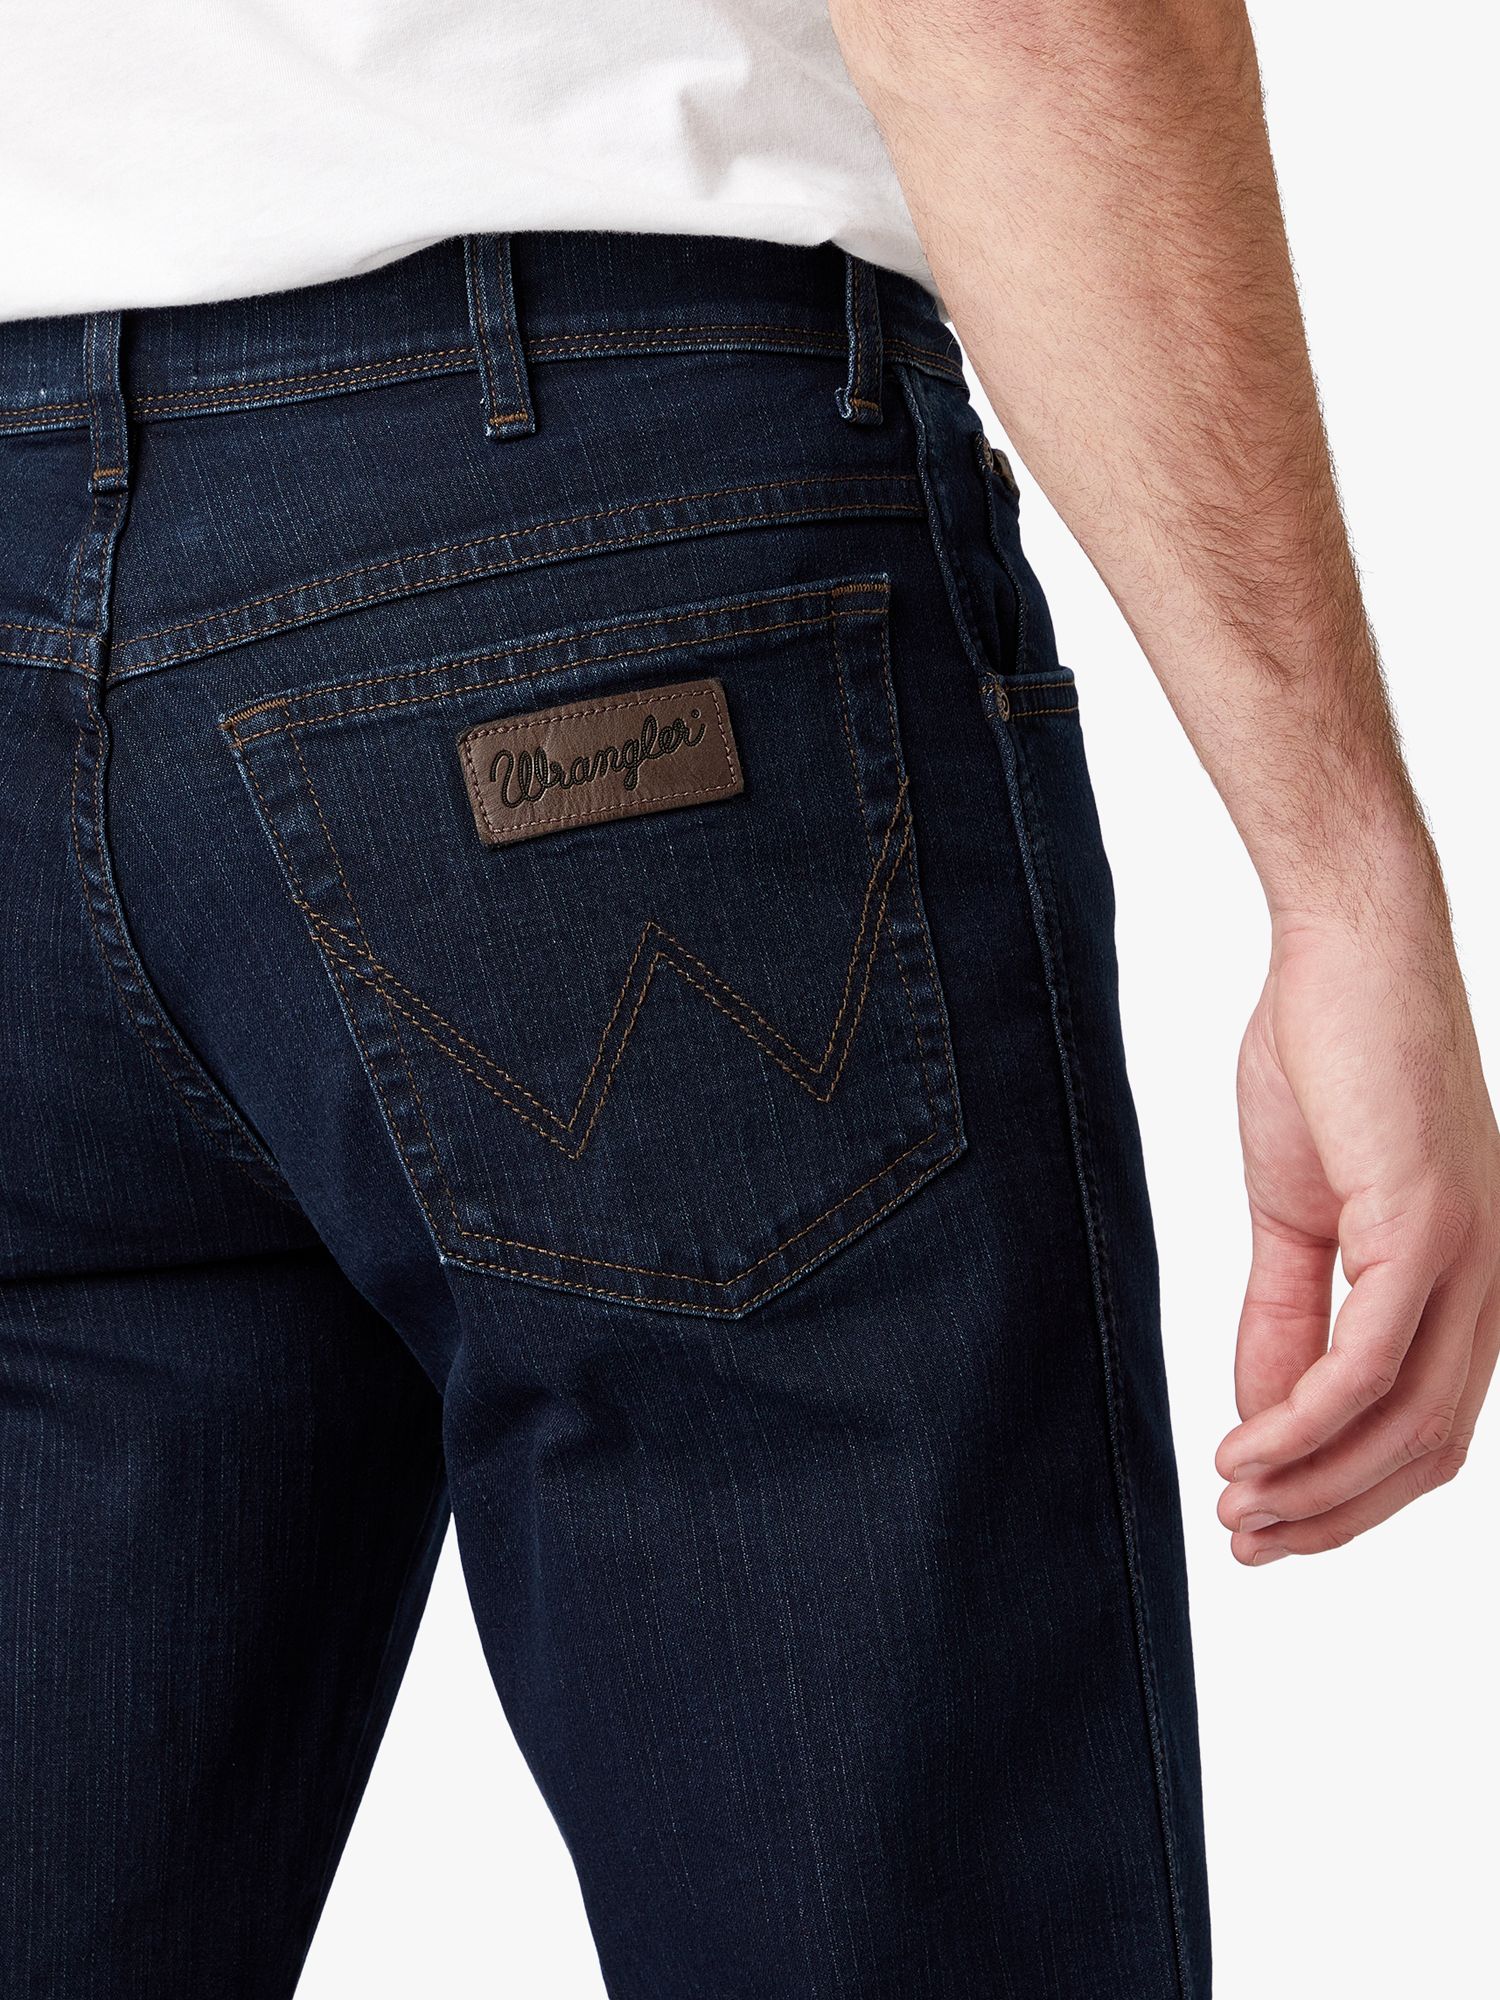 Wrangler Texas Fit Jeans, at John Lewis & Partners